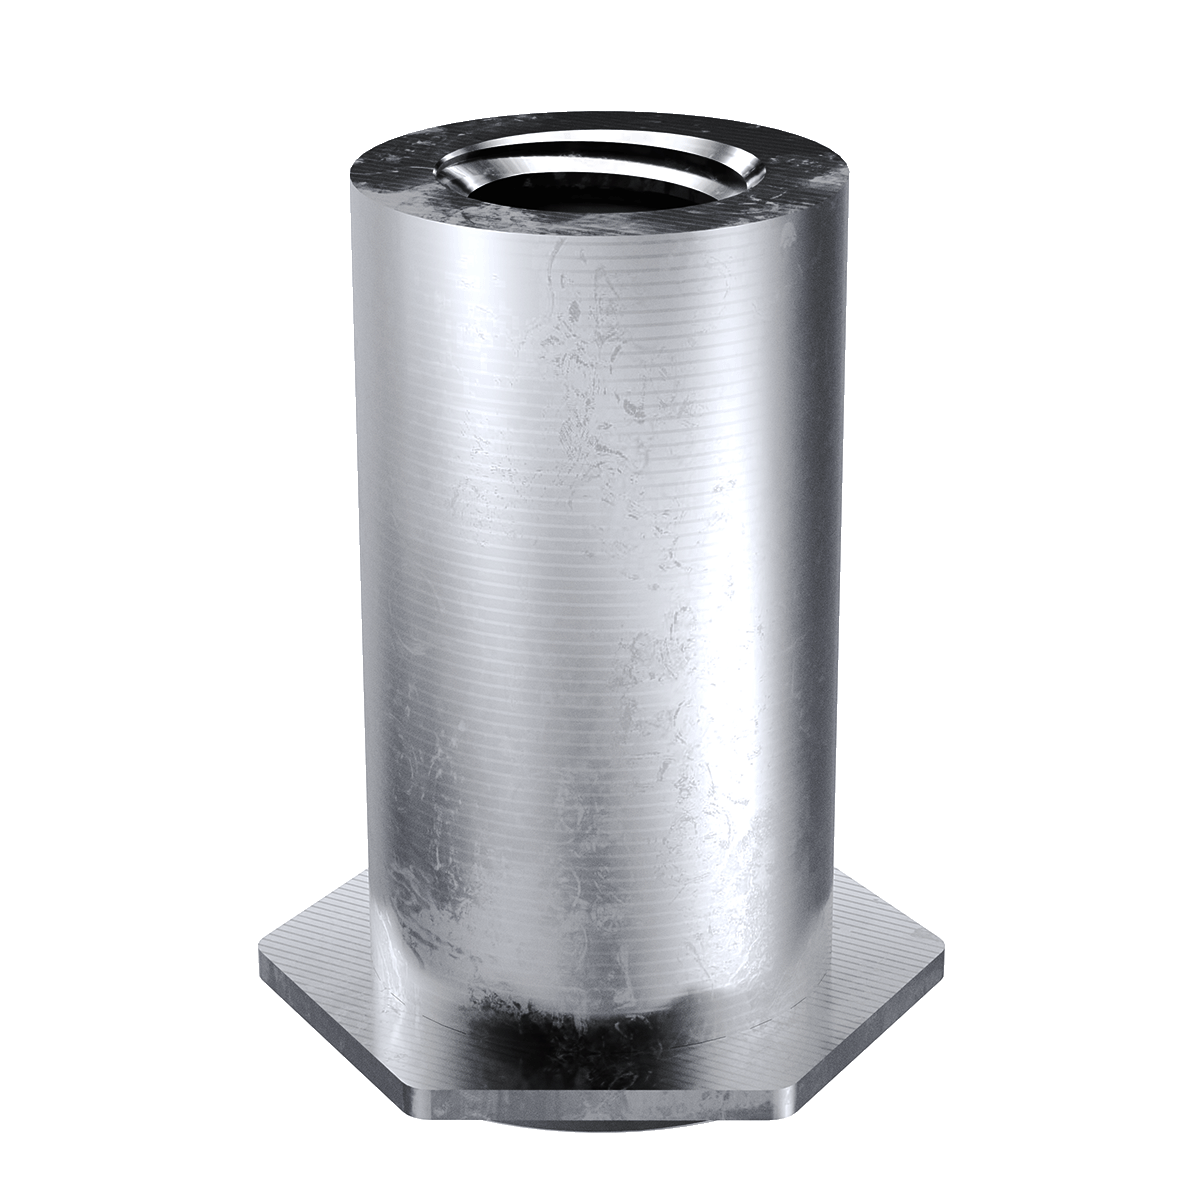 Self-Clinching Standoff, Concealed Head, 300 Series Stainless Steel, Passivated, 4-40 x 0.187, Sheet Thick.: 0.062, 100 Pack